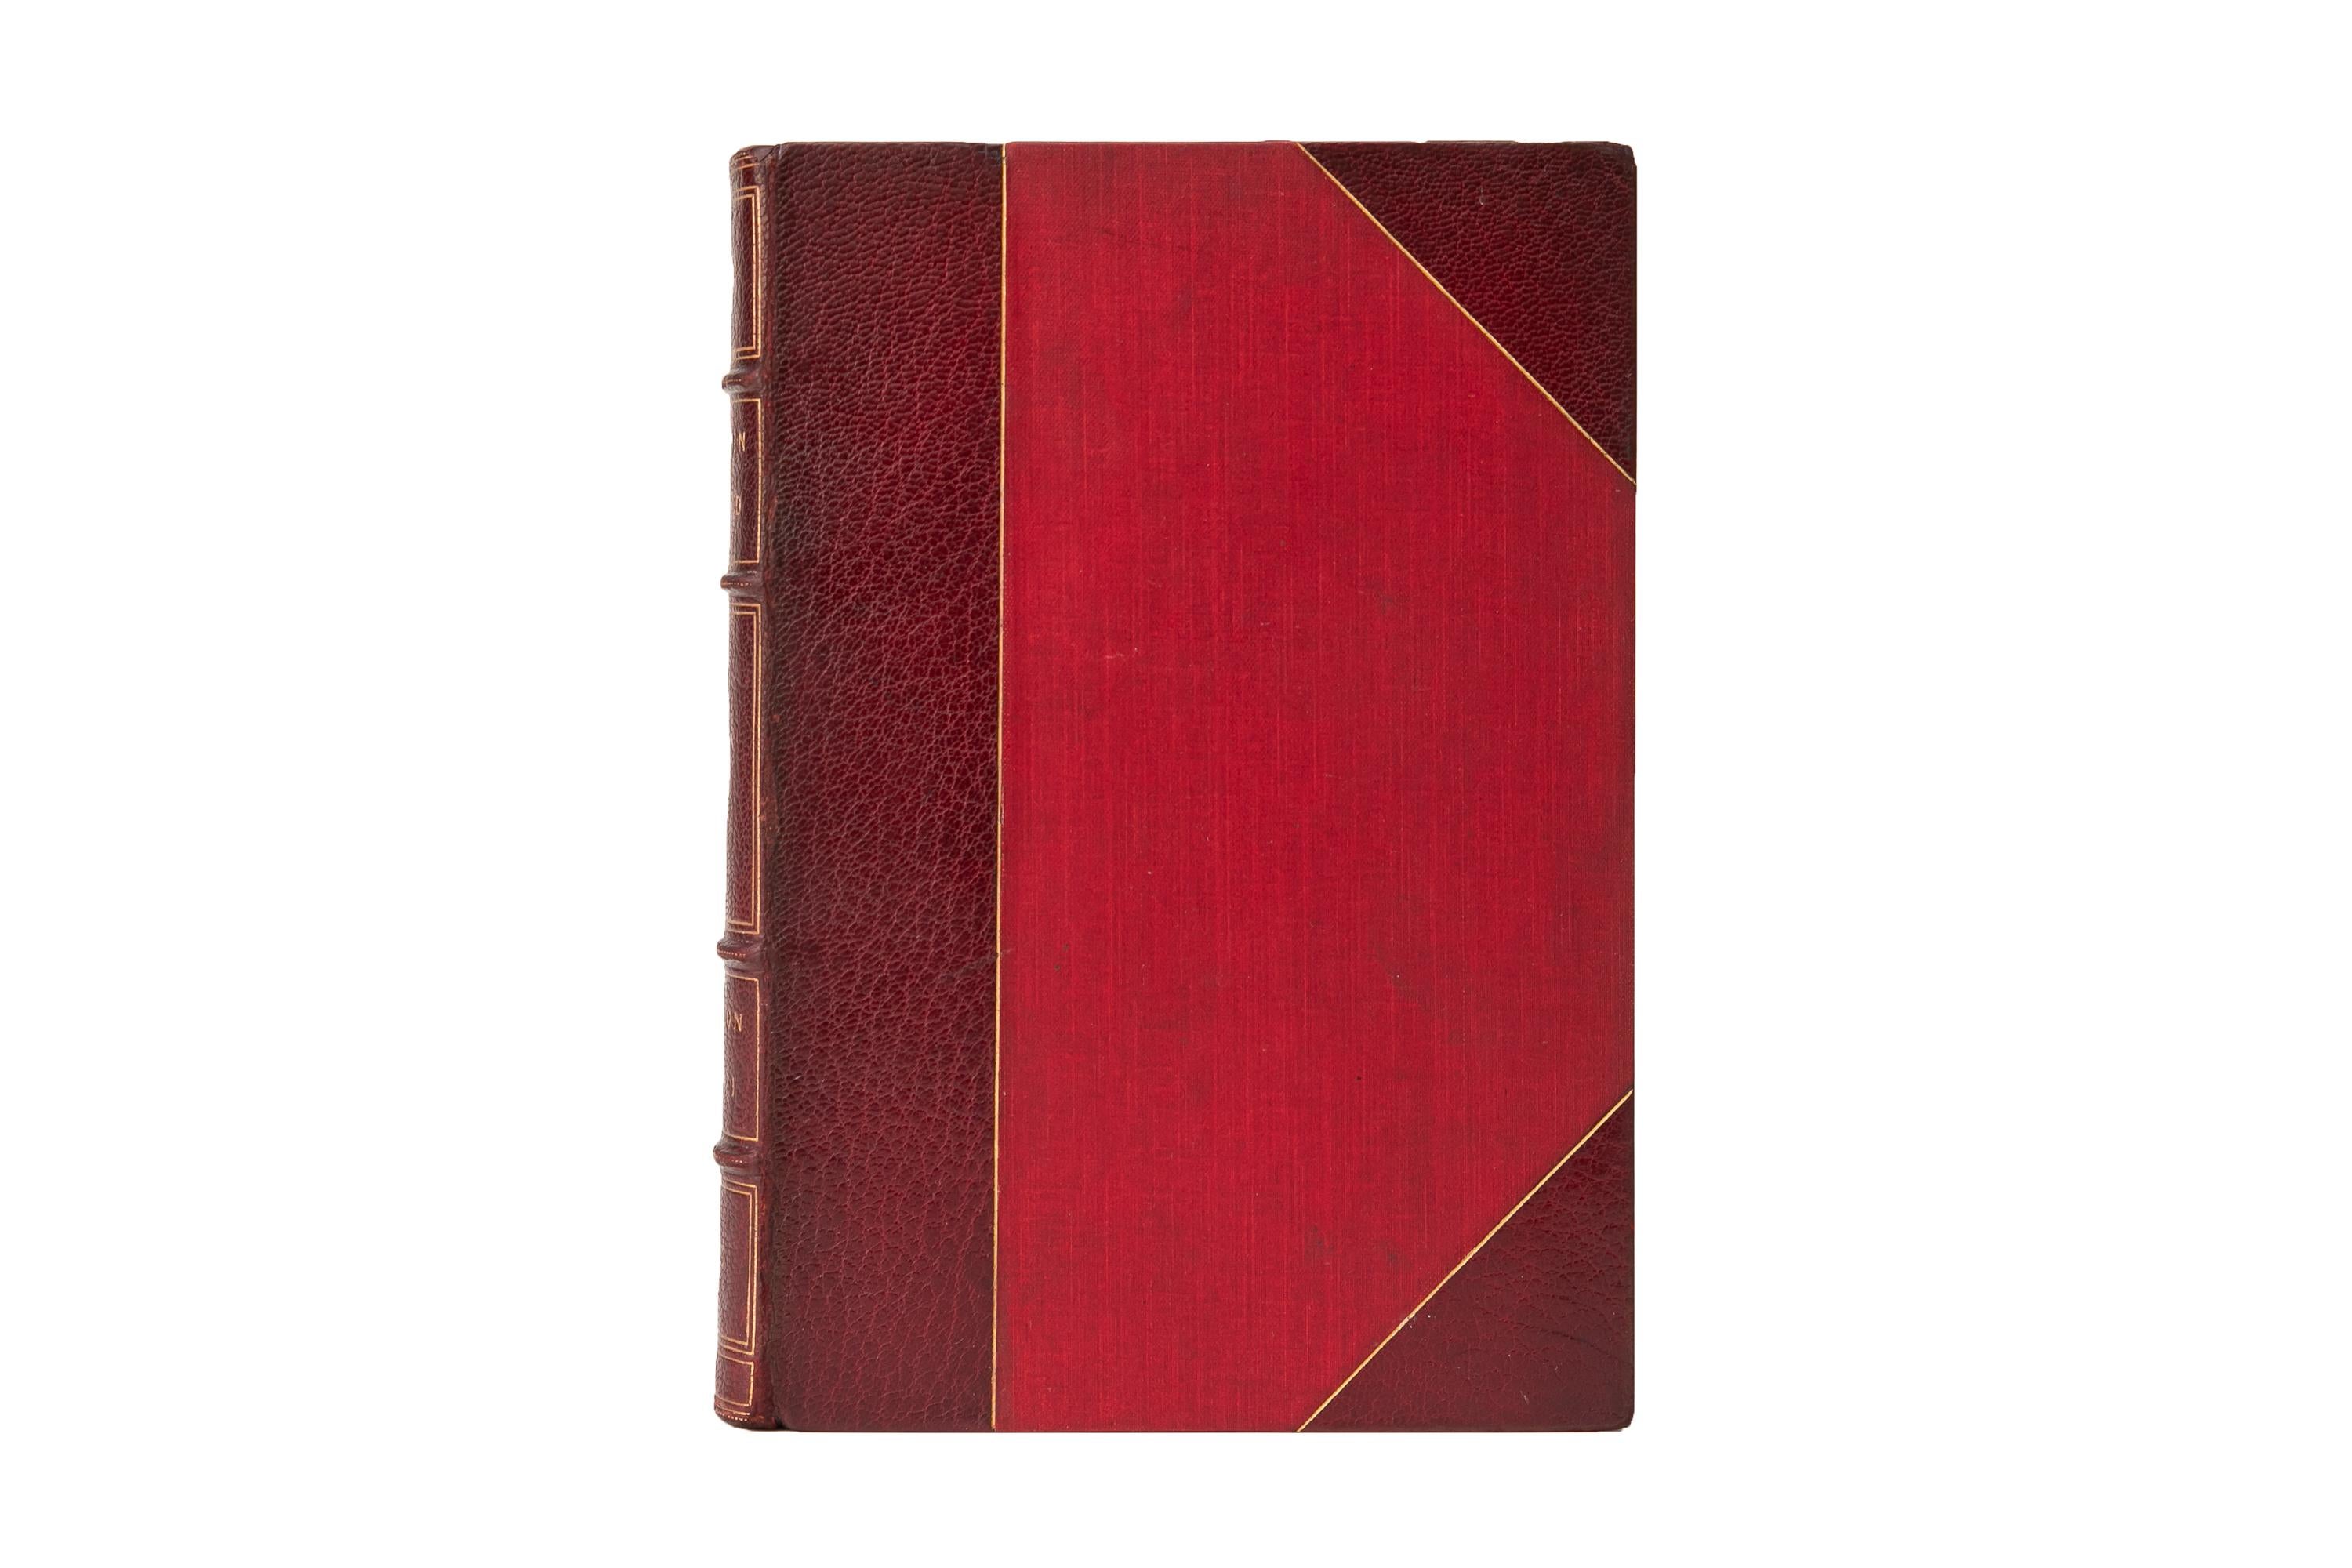 2 Volumes. Joseph Ritson, Robin Hood. Bound by Birdsall in 3/4 red morocco and linen boards. The covers and raised band spines are gilt-tooled. The top edges are gilt with marbled endpapers. Prefixed by historical anecdotes of his life. 80 wood